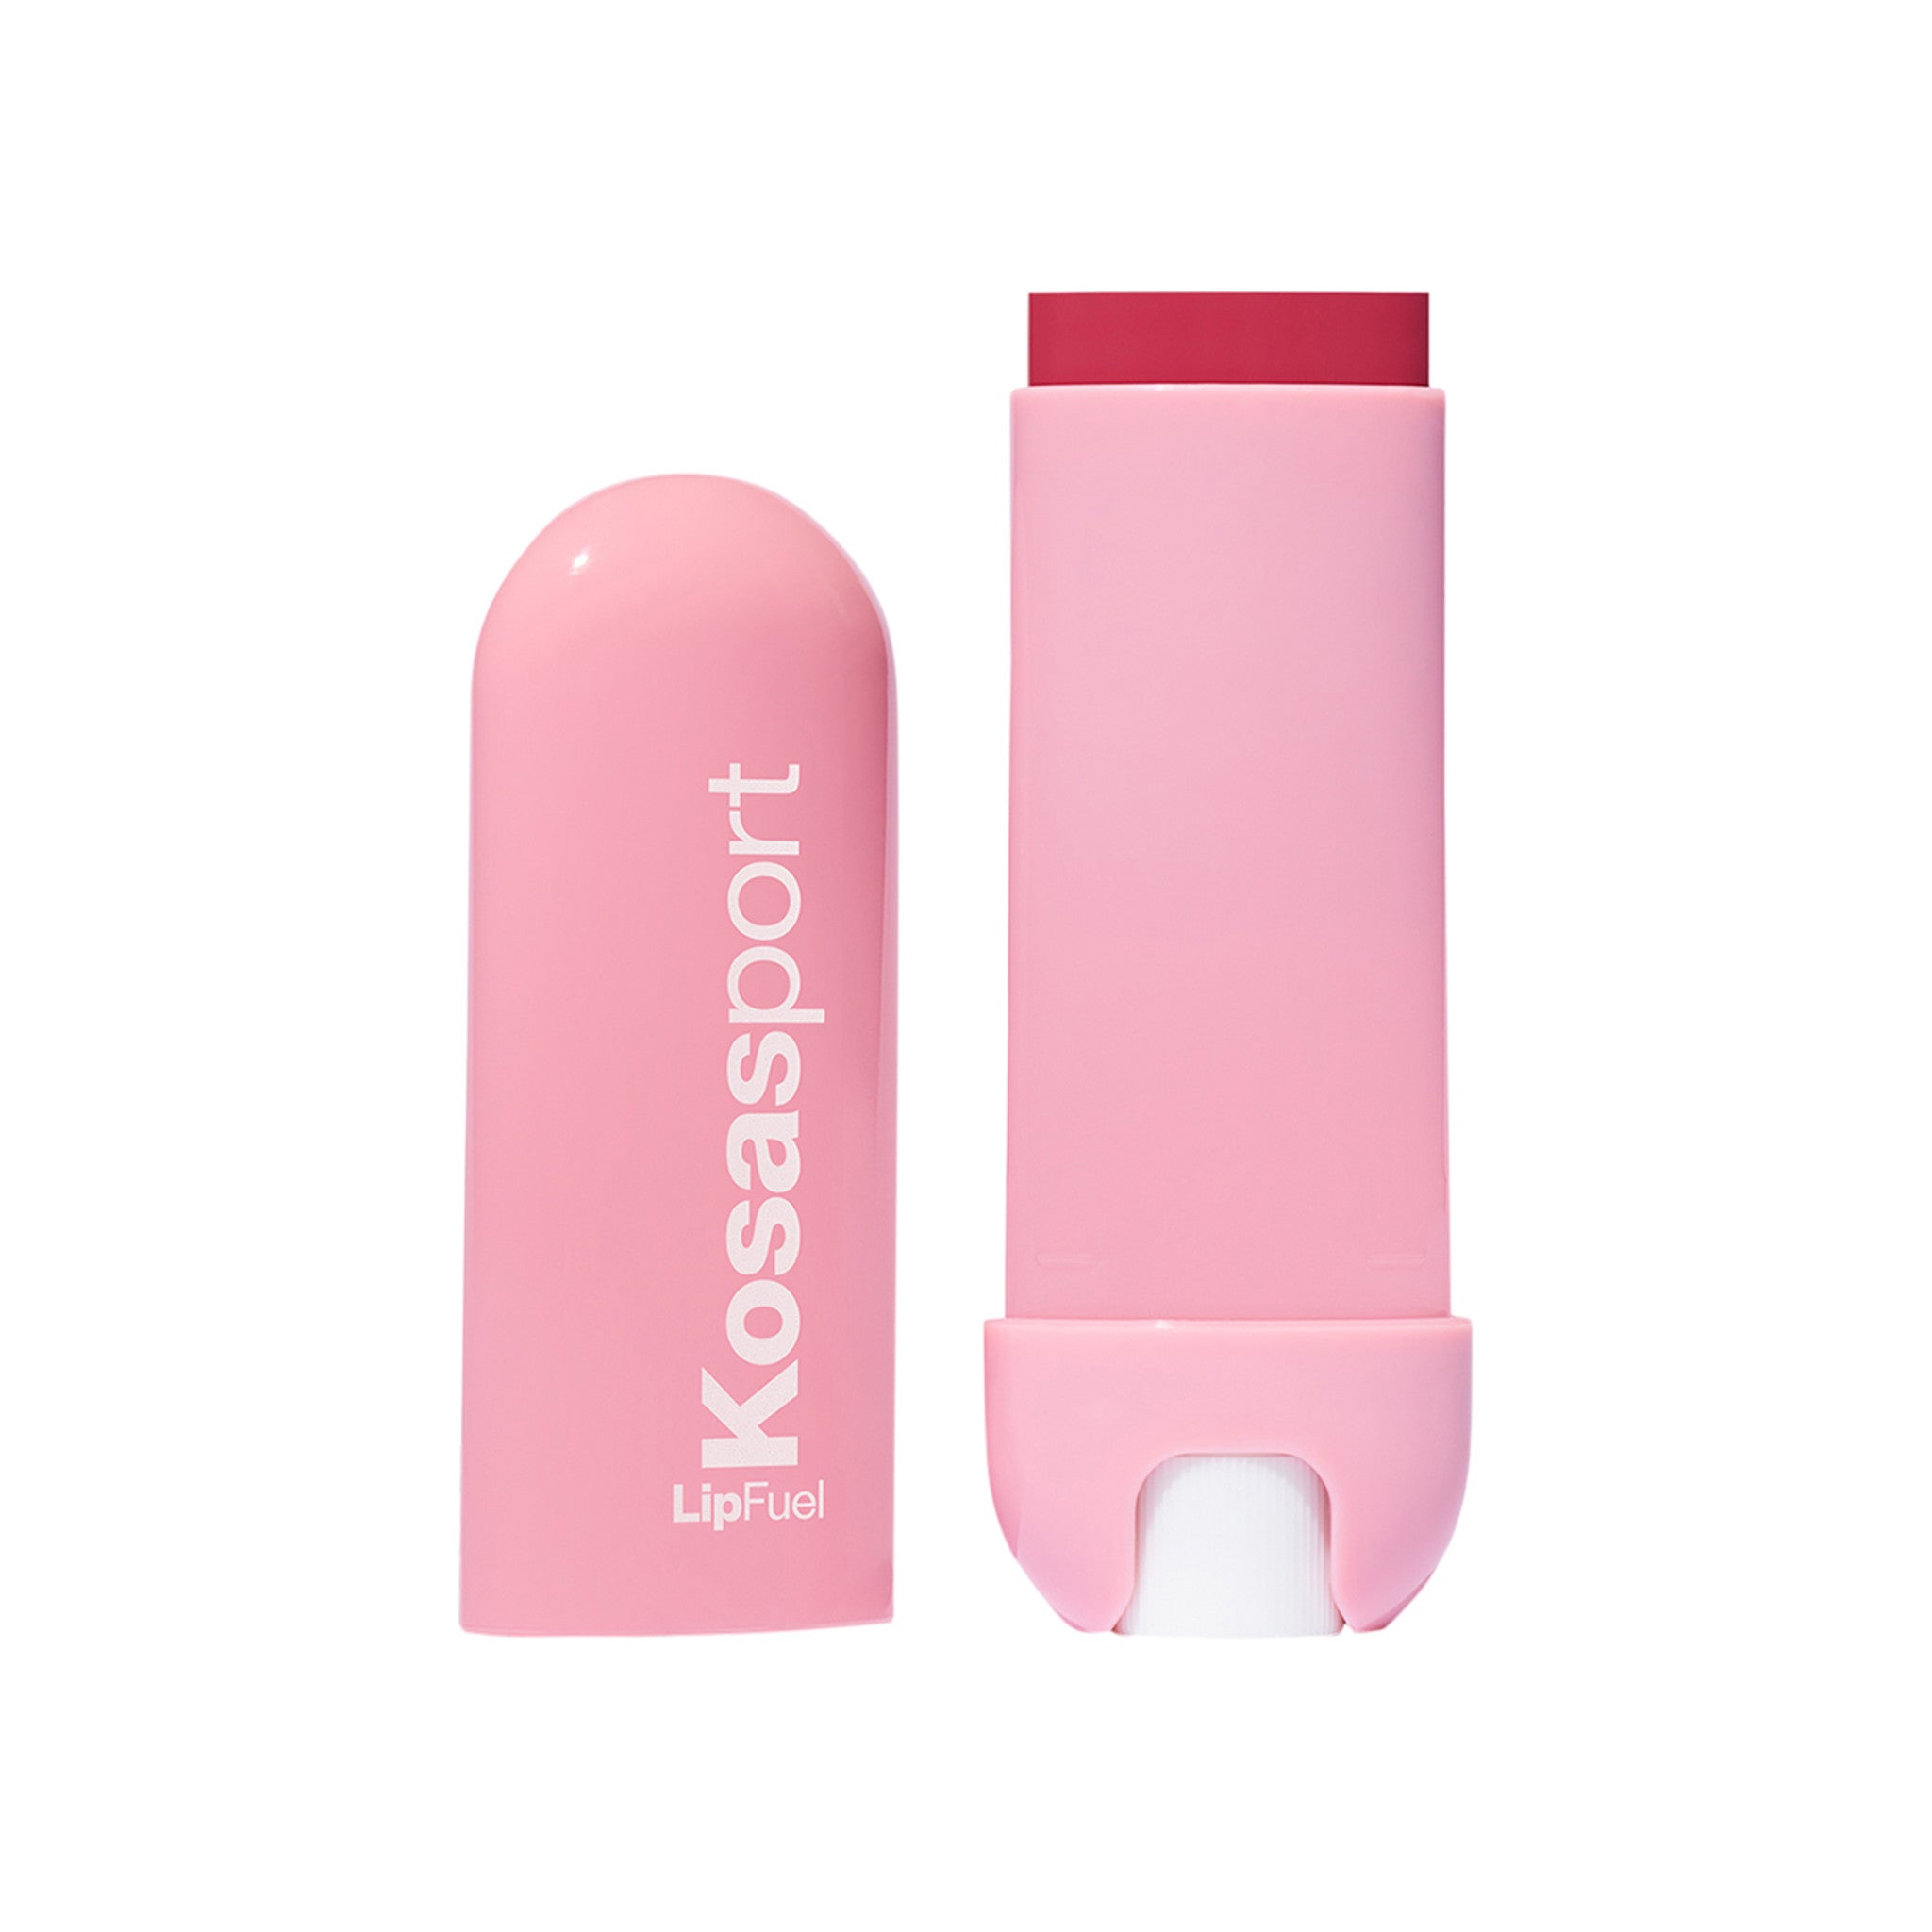 Kosas Kosasport LipFuel Hylauronic Lip Balm Color/Shade variant: Rush main image. This product is in the color pink